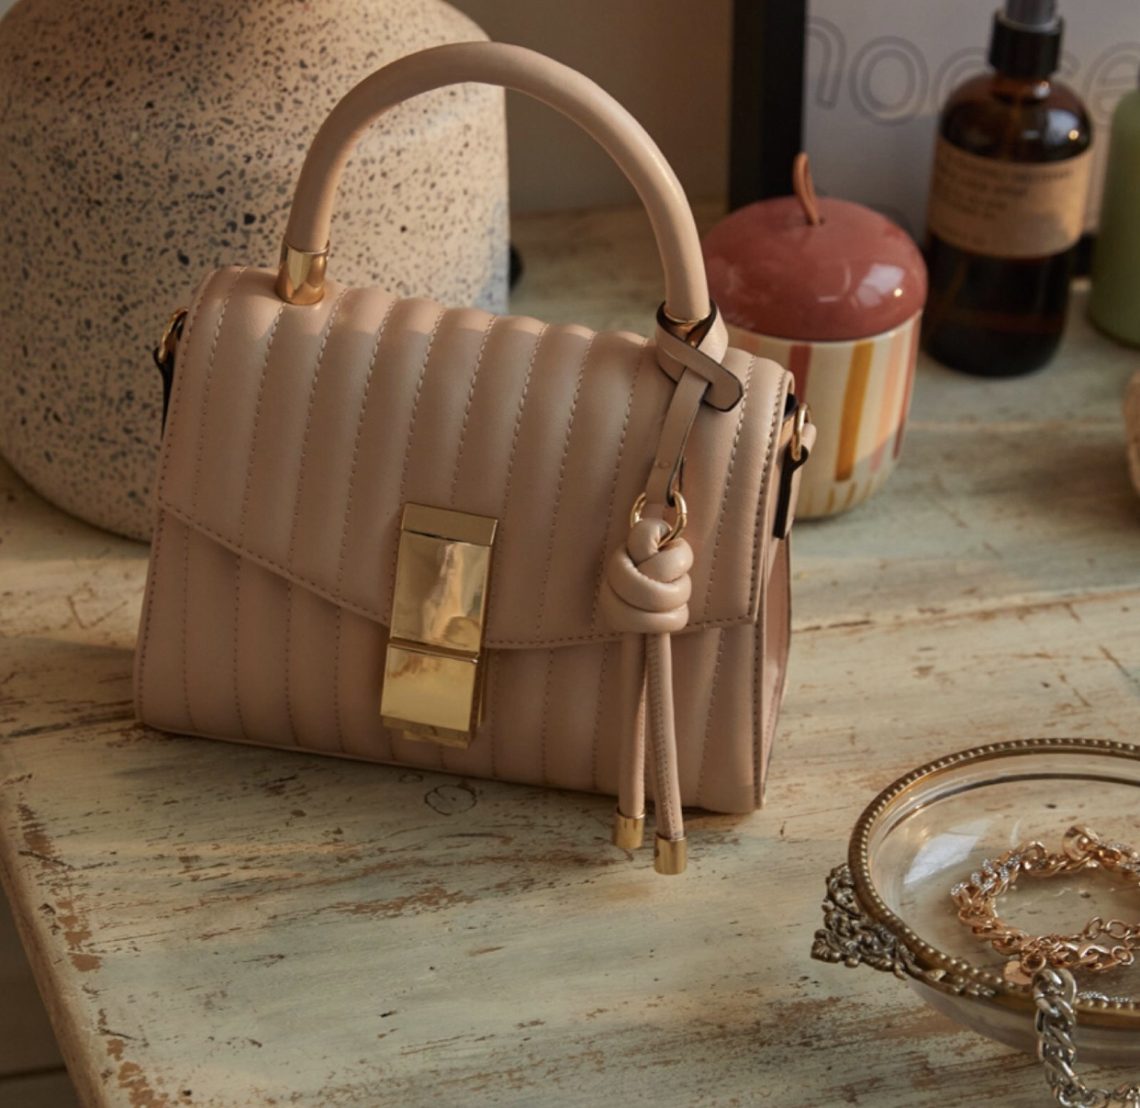 alt="The Best ALDO Handbags To Complete Your Spring Outfits"